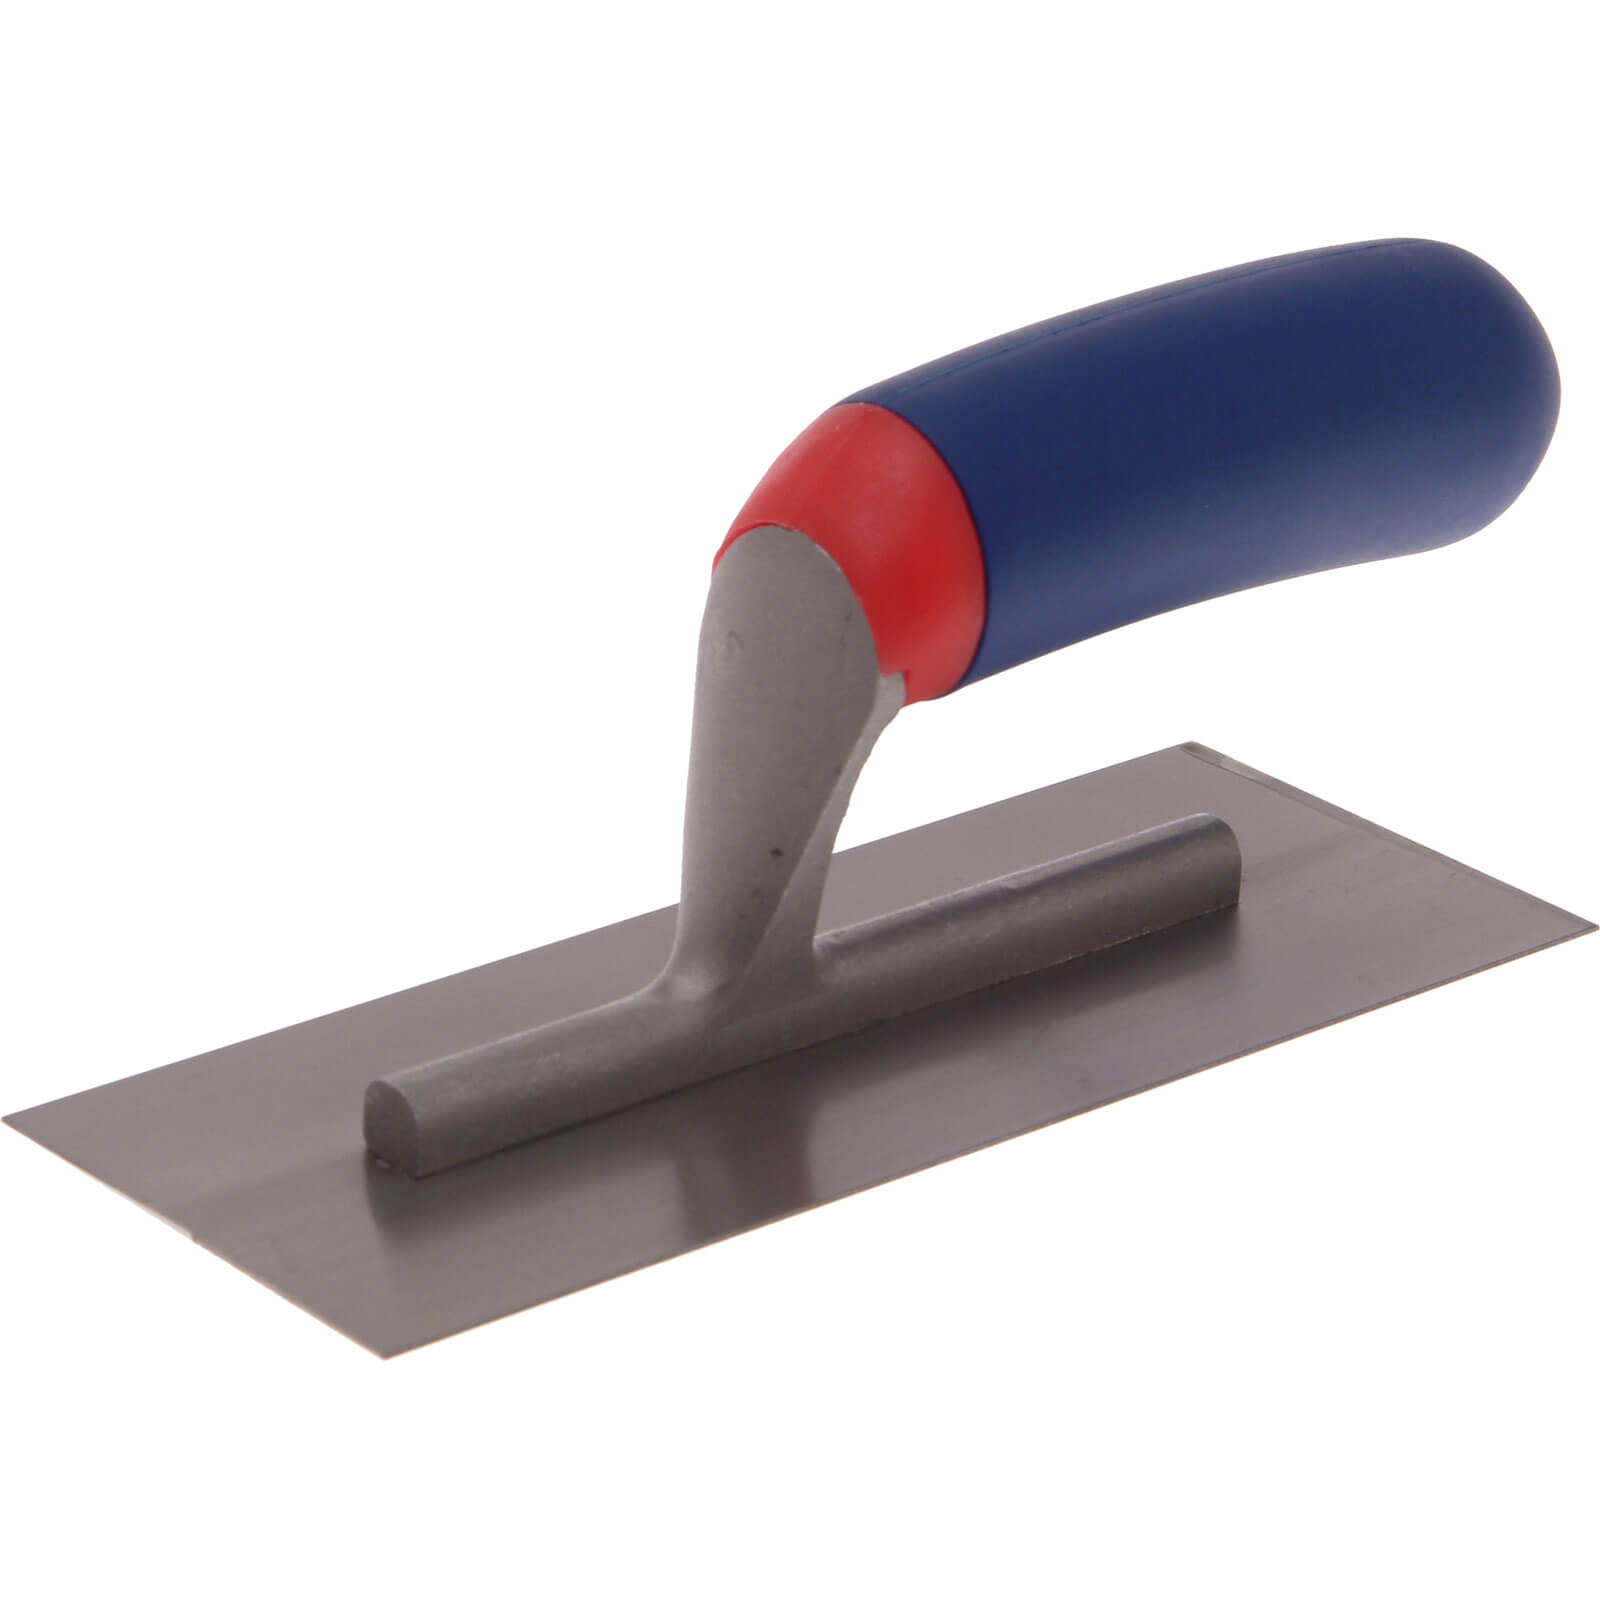 Image of RST Soft Touch Midget Trowel 7"